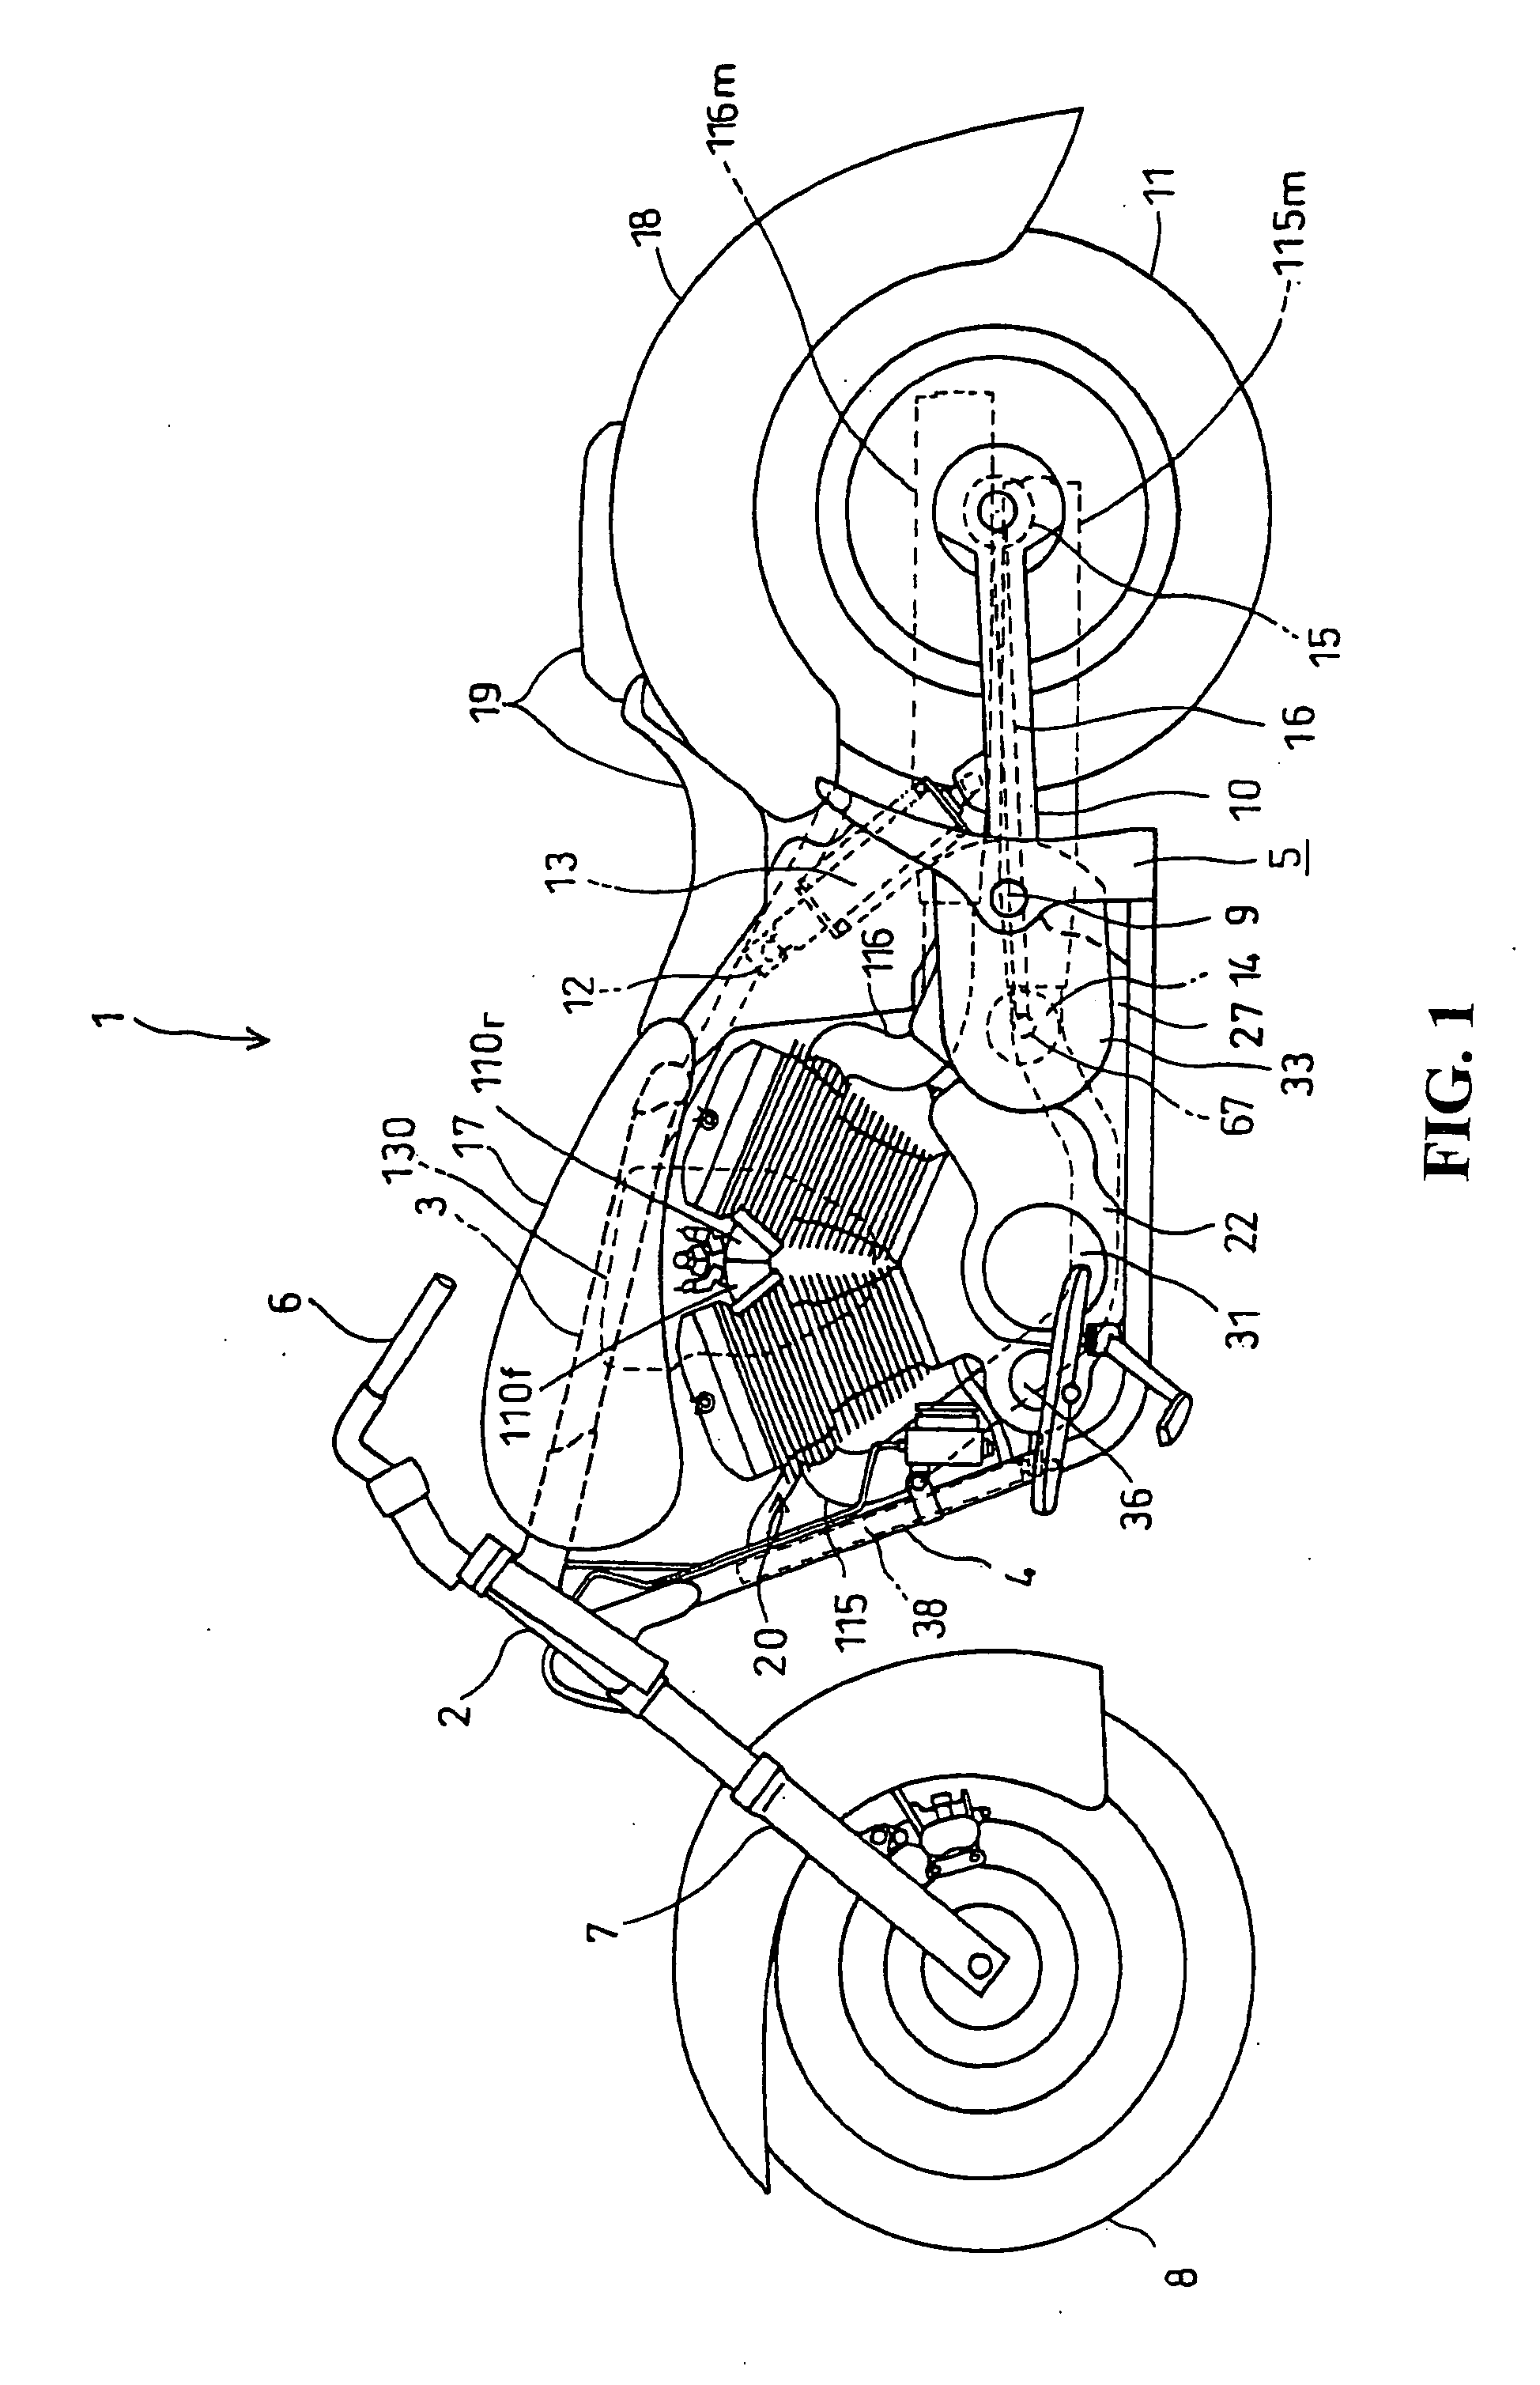 Layout structure of hydraulic control valve for valve train in internal combustion engine